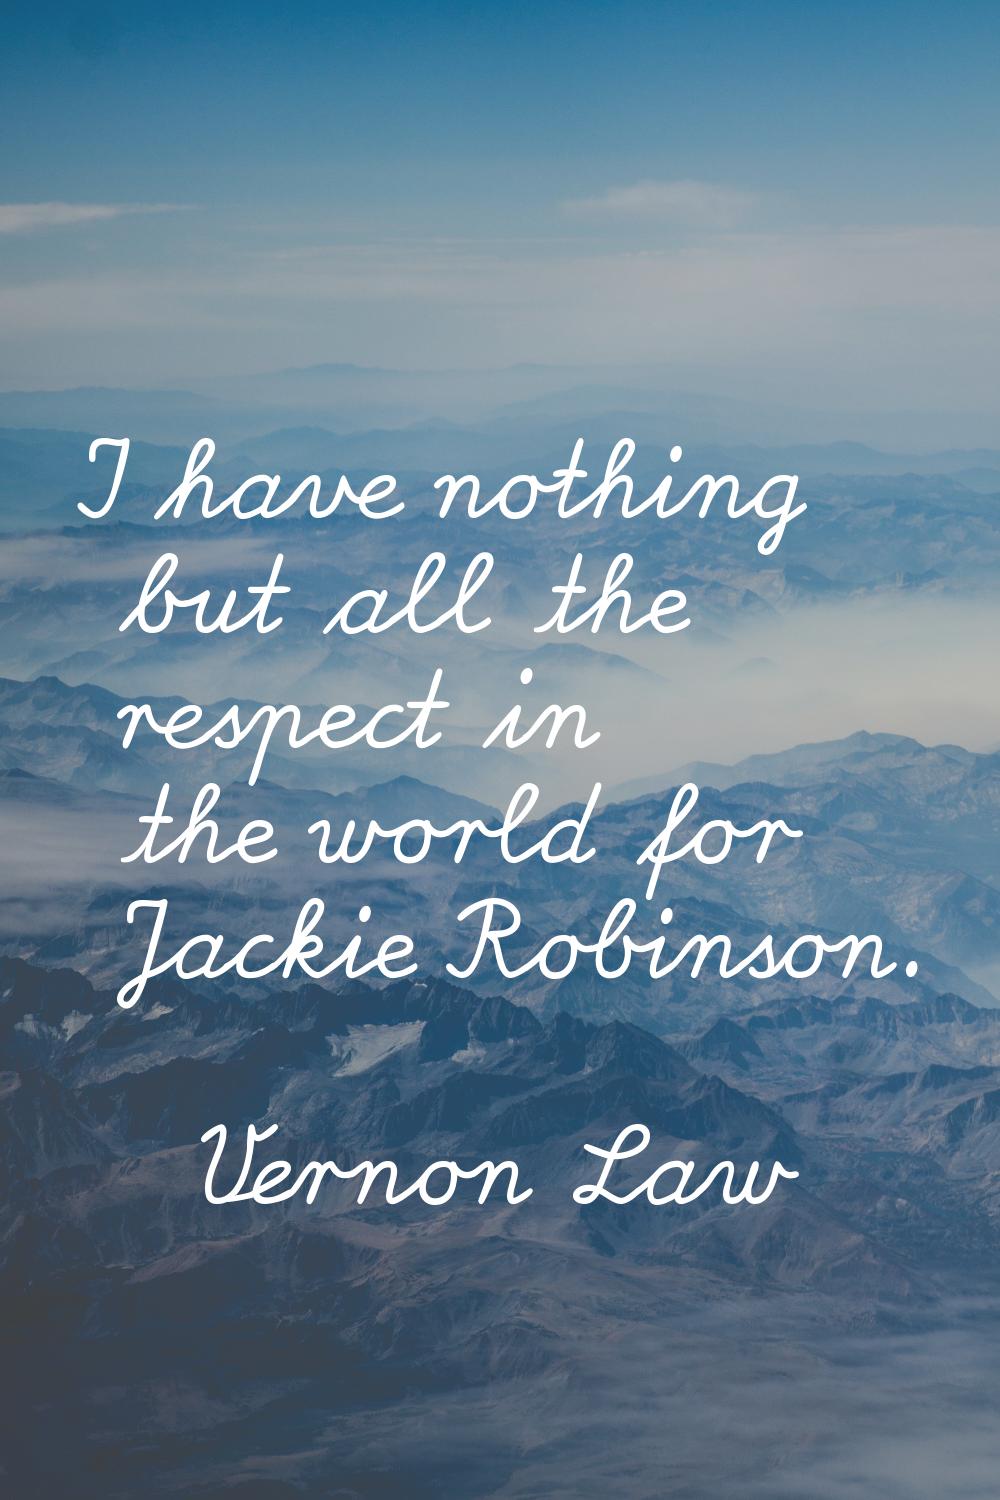 I have nothing but all the respect in the world for Jackie Robinson.